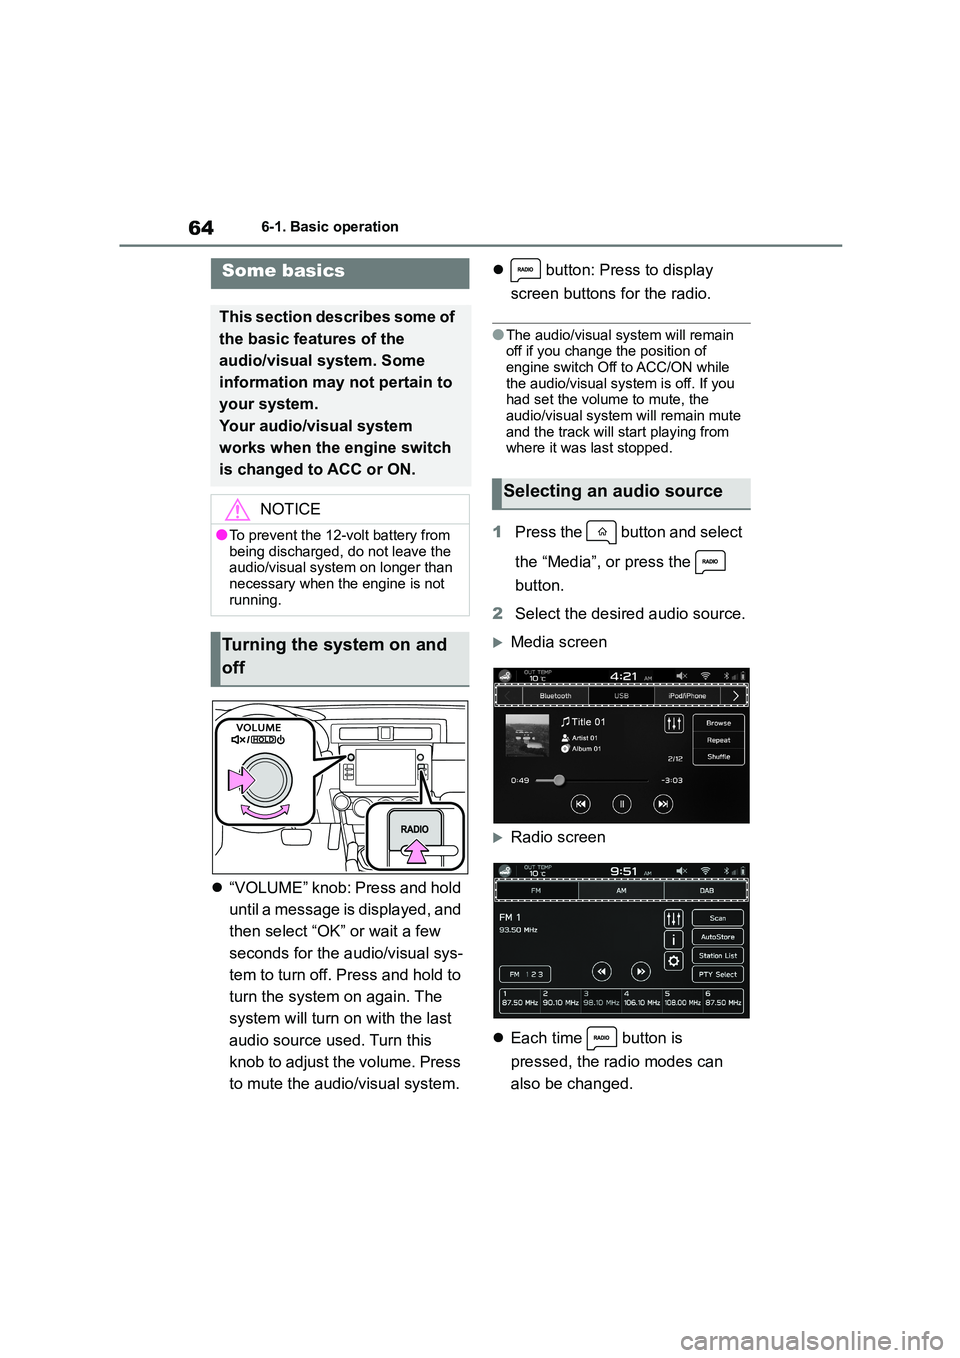 TOYOTA GR86 2022  Owners Manual (in English) 646-1. Basic operation
6-1.Basic operation
“VOLUME” knob: Press and hold  
until a message is displayed, and 
then select “OK” or wait a few 
seconds for the audio/visual sys-
tem to turn o